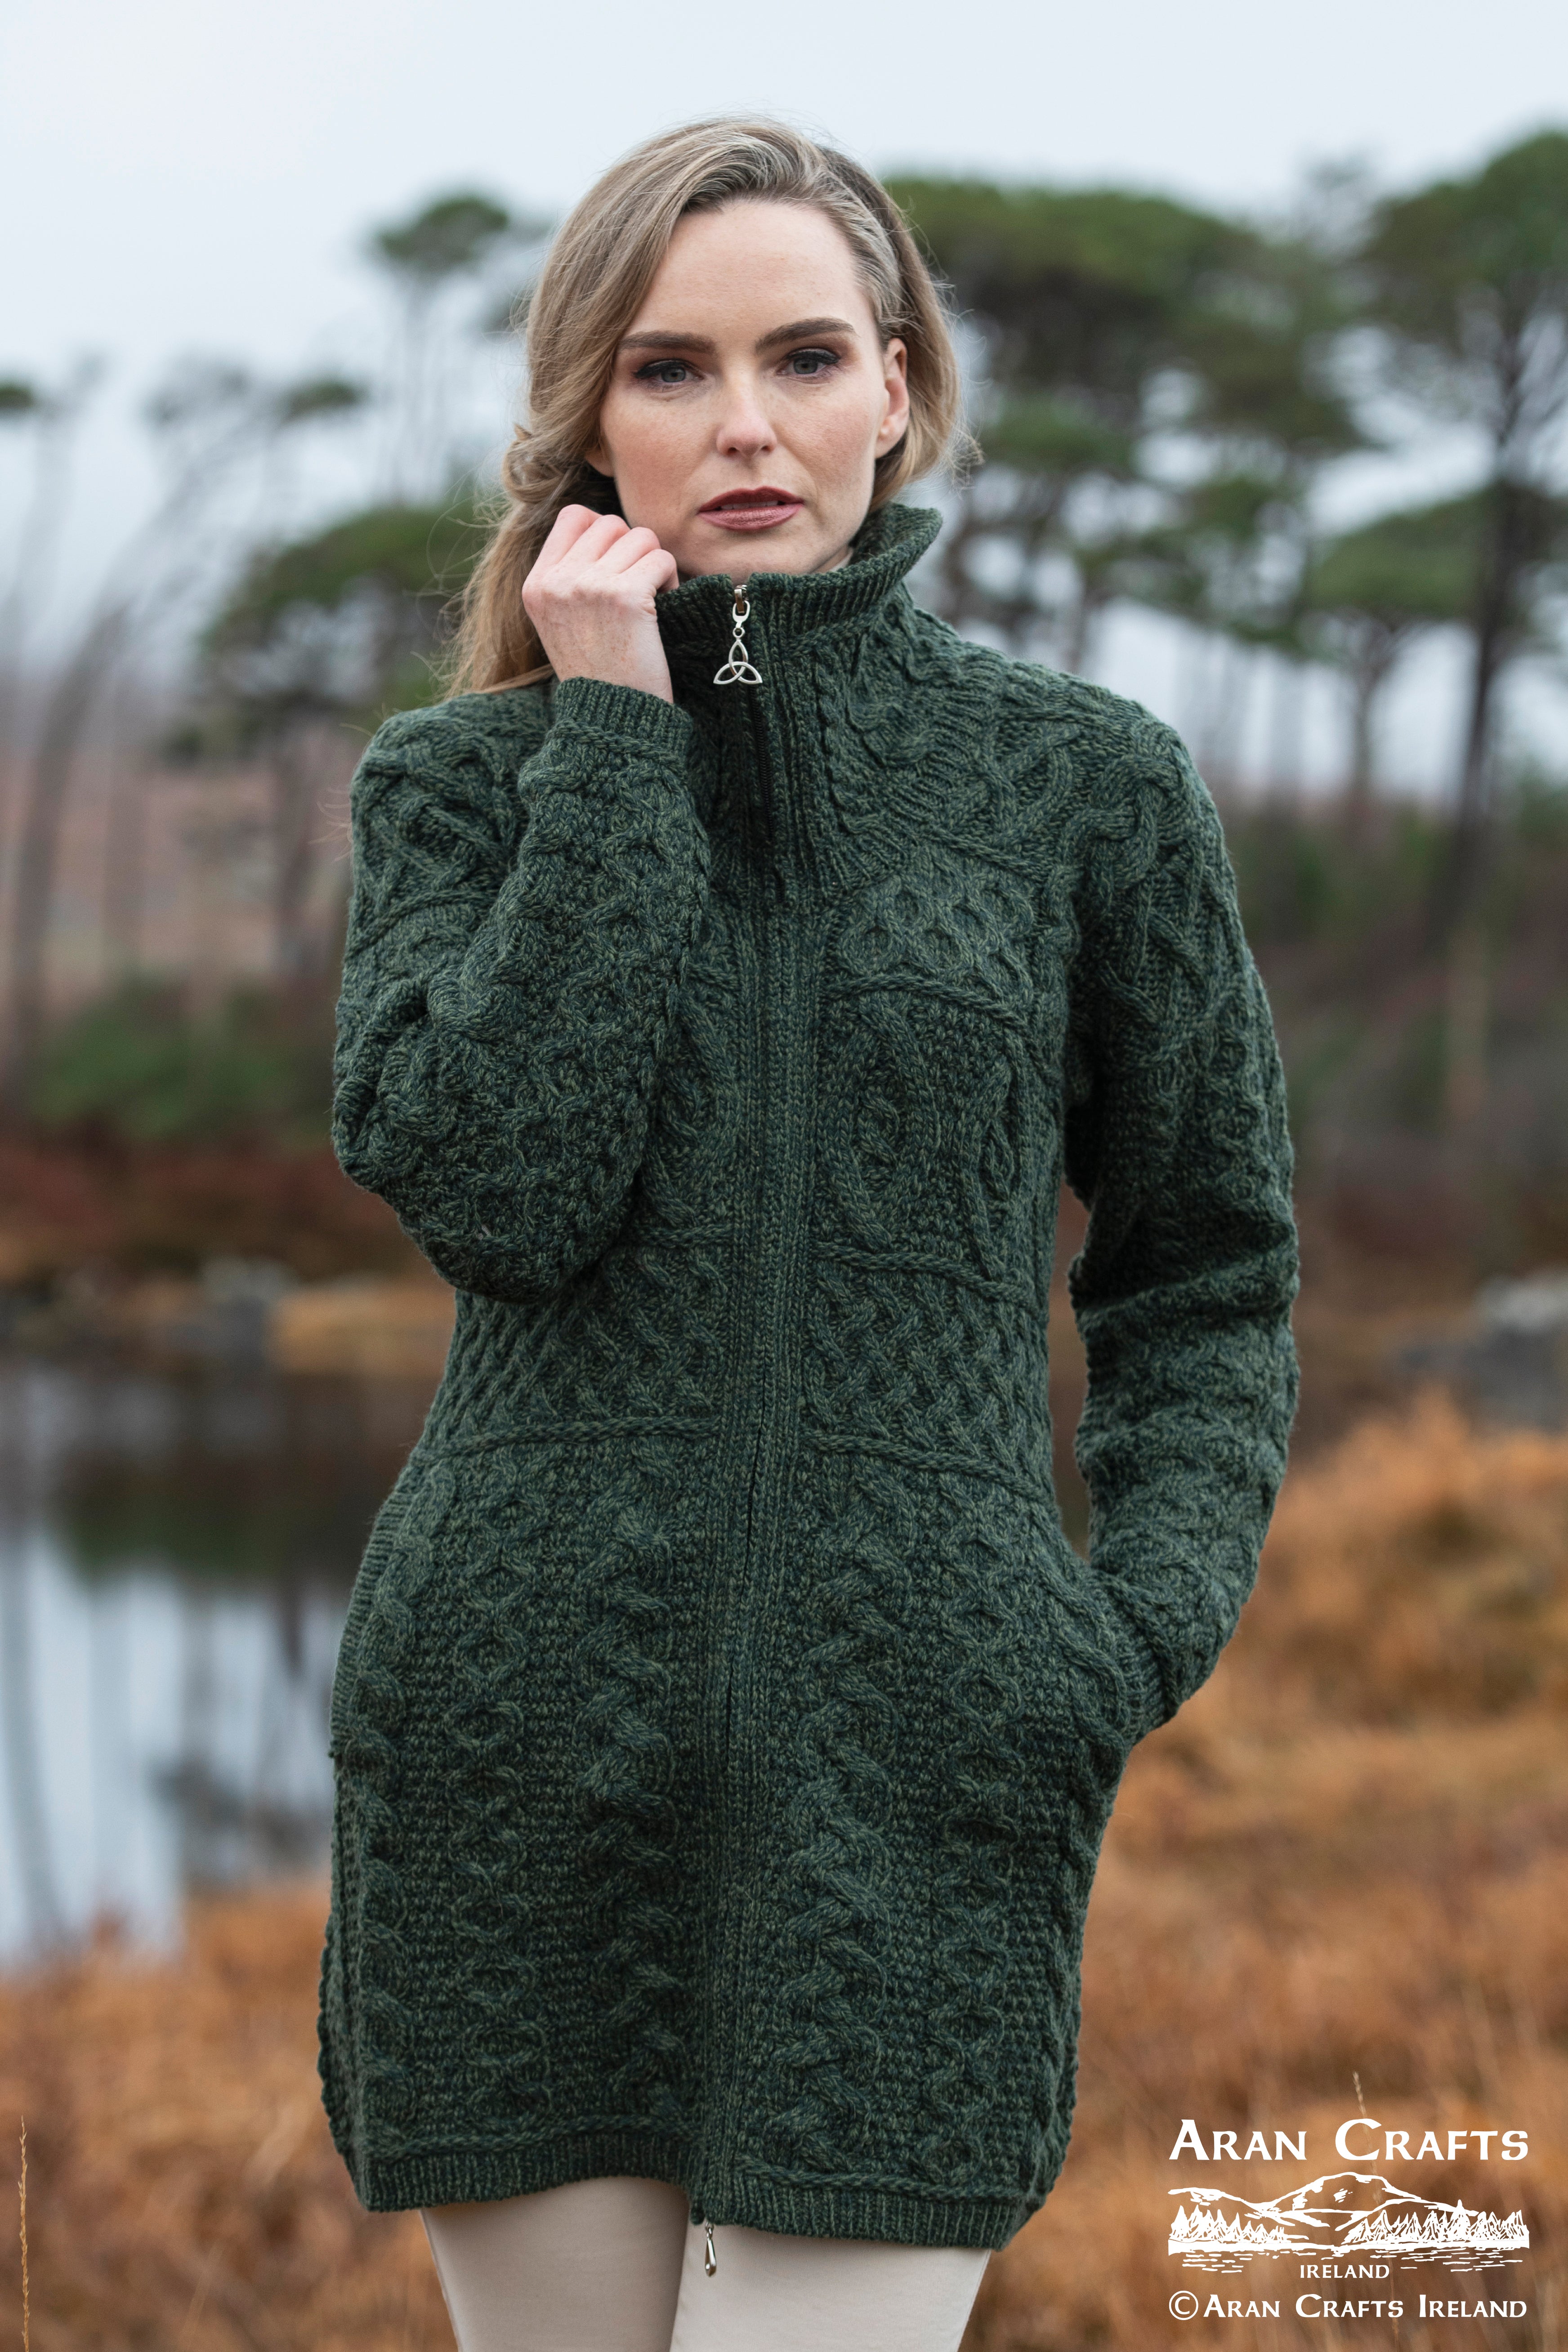 WestEnd Knitwear | High Collar Coat with Pockets | x4263- Army Green